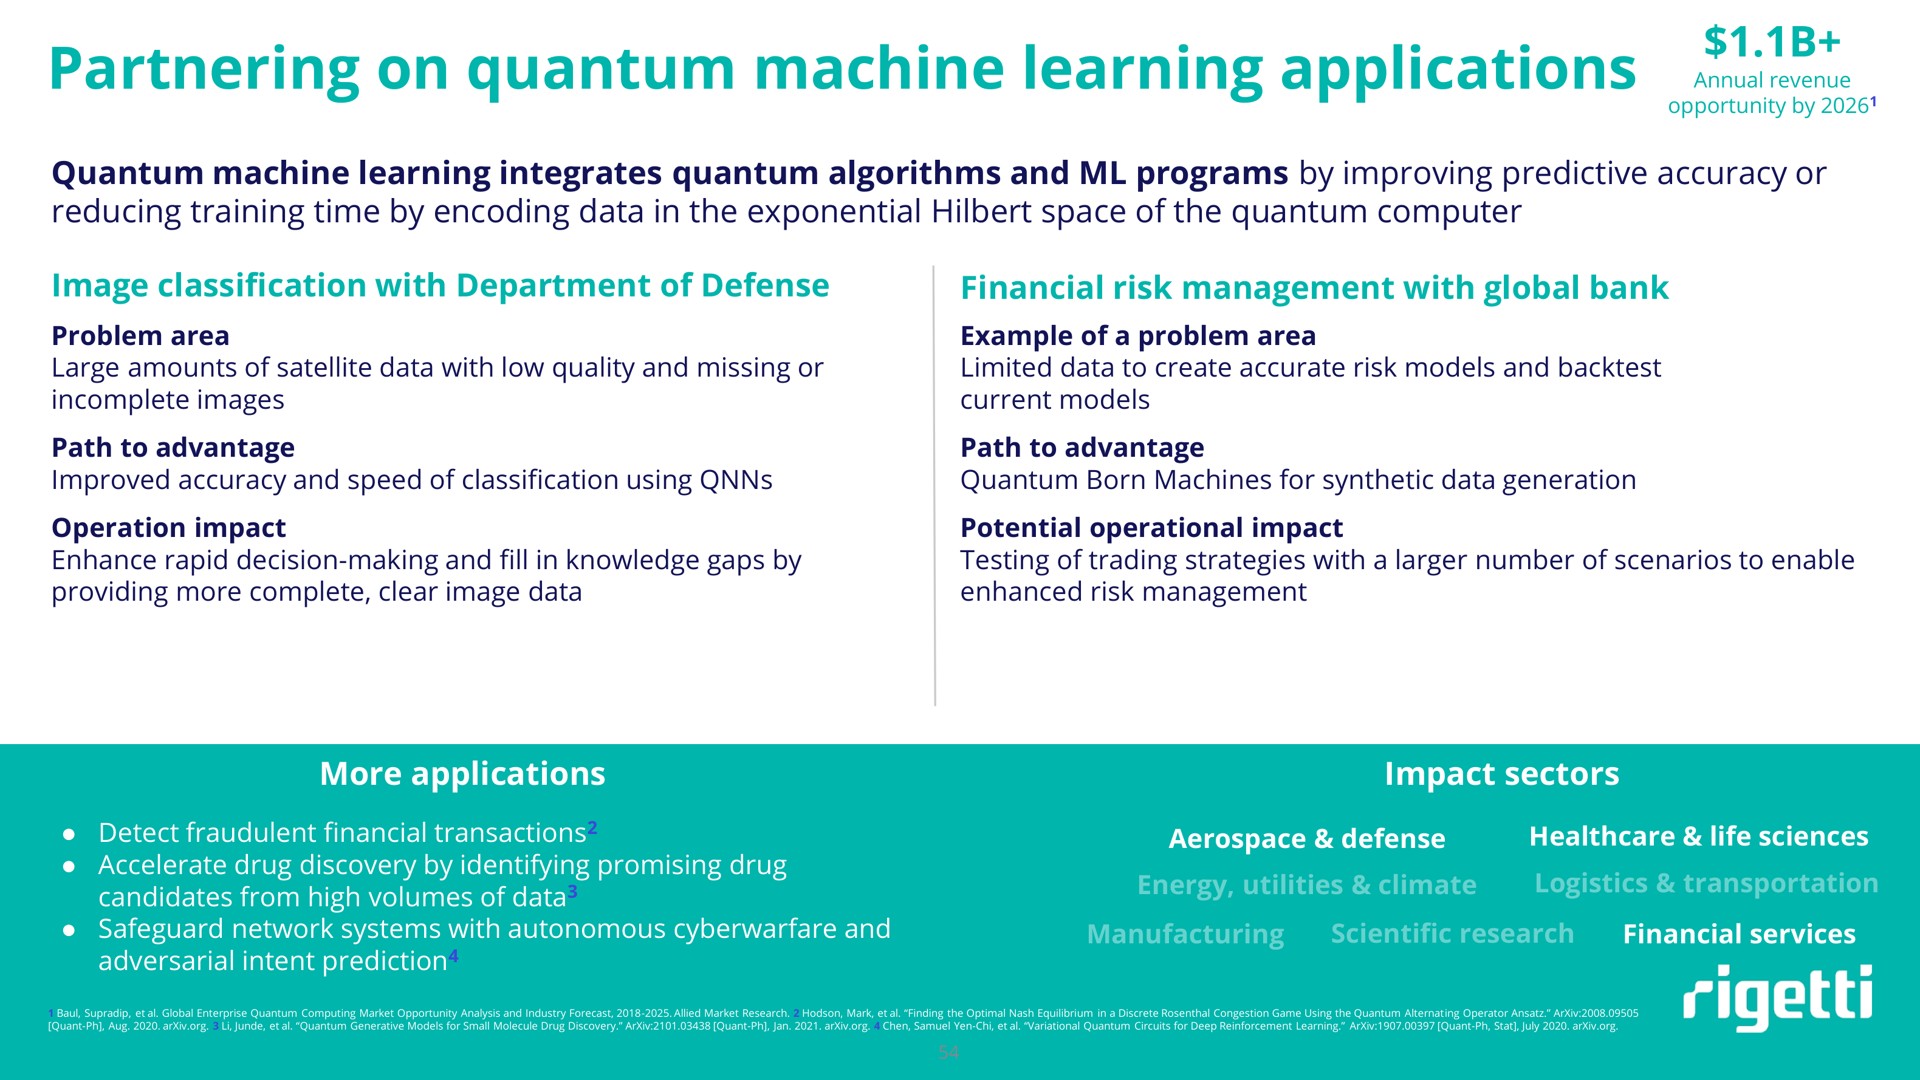 partnering on quantum machine learning applications | Rigetti